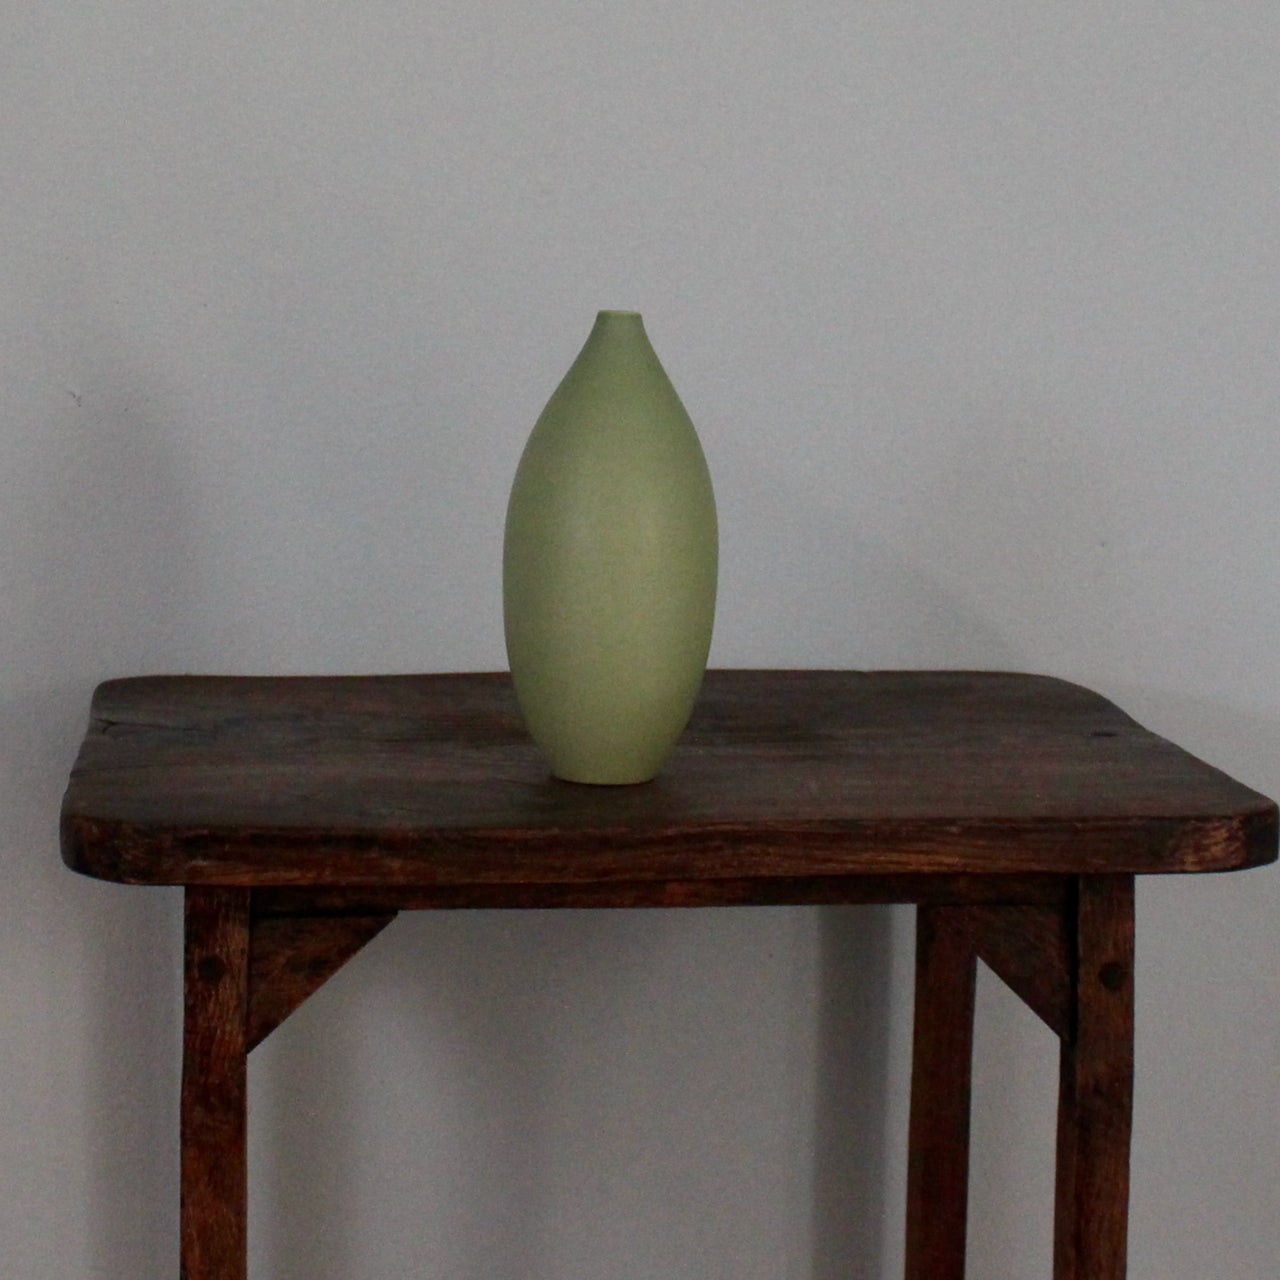  Green oval vase by UK ceramic artist Lucy Burley.